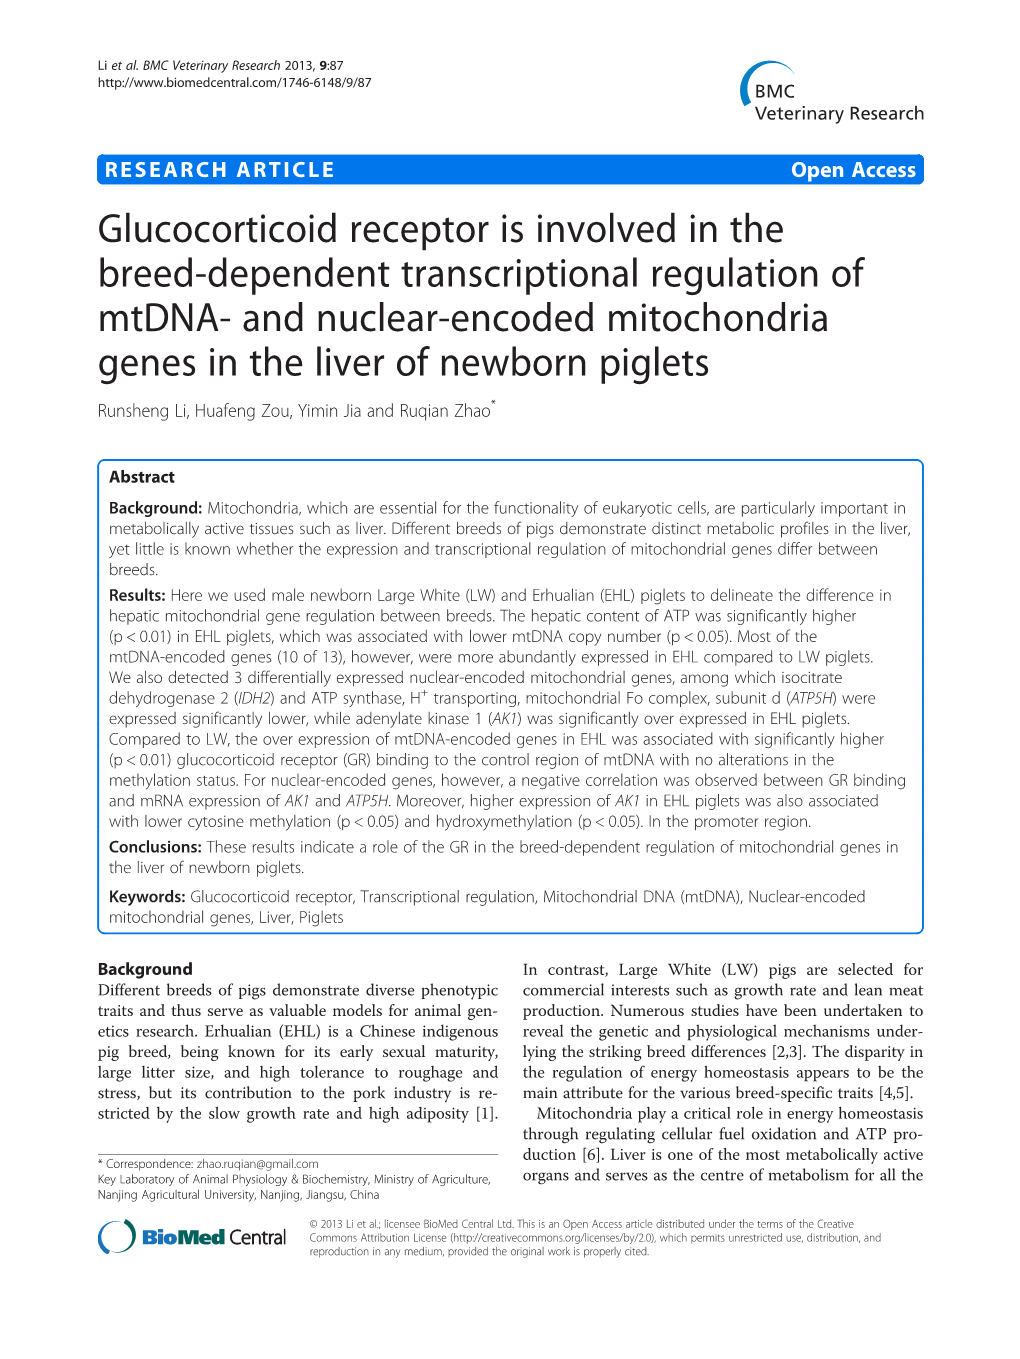 Glucocorticoid Receptor Is Involved in the Breed-Dependent Transcriptional